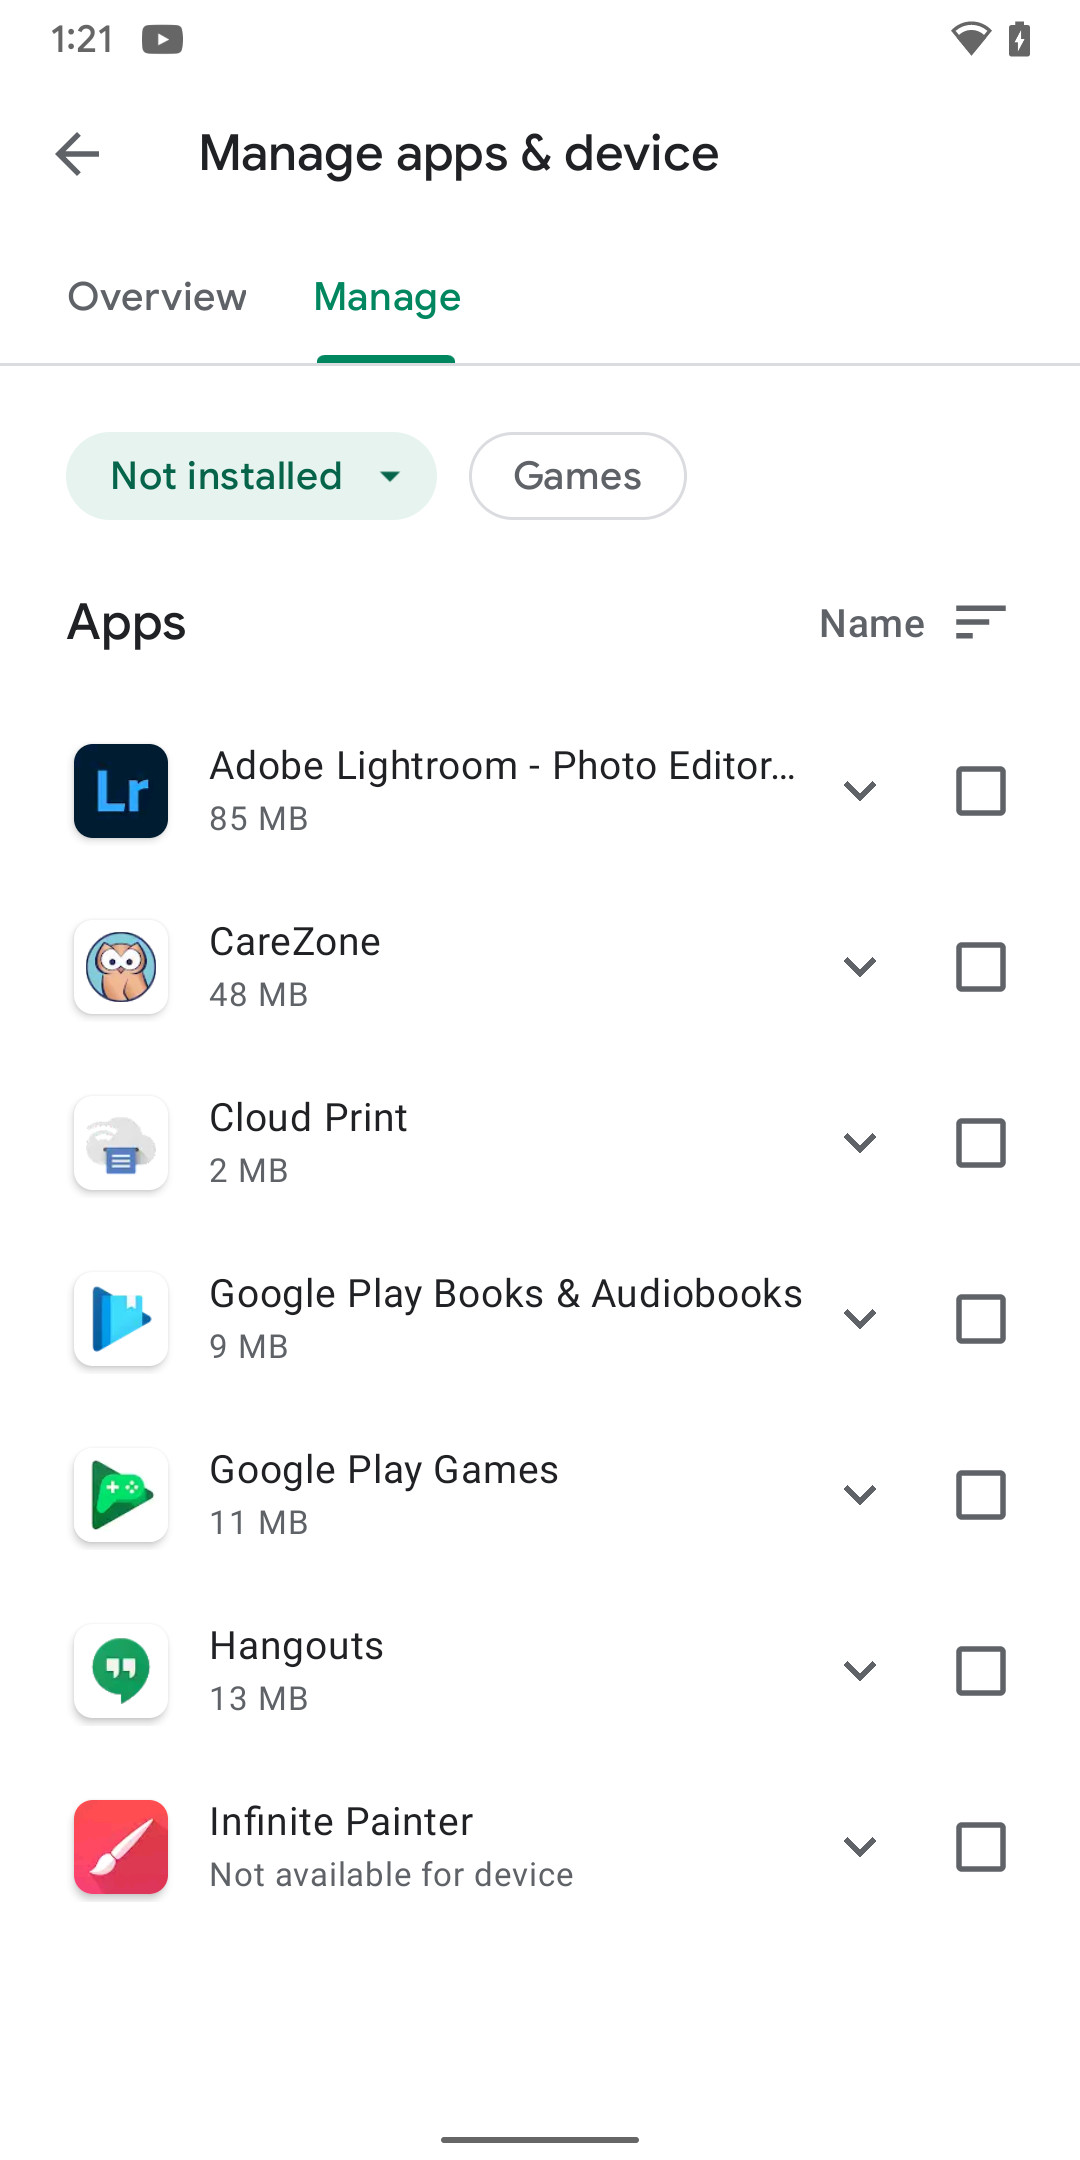 Check your “Not installed” apps for any you want to re-install.